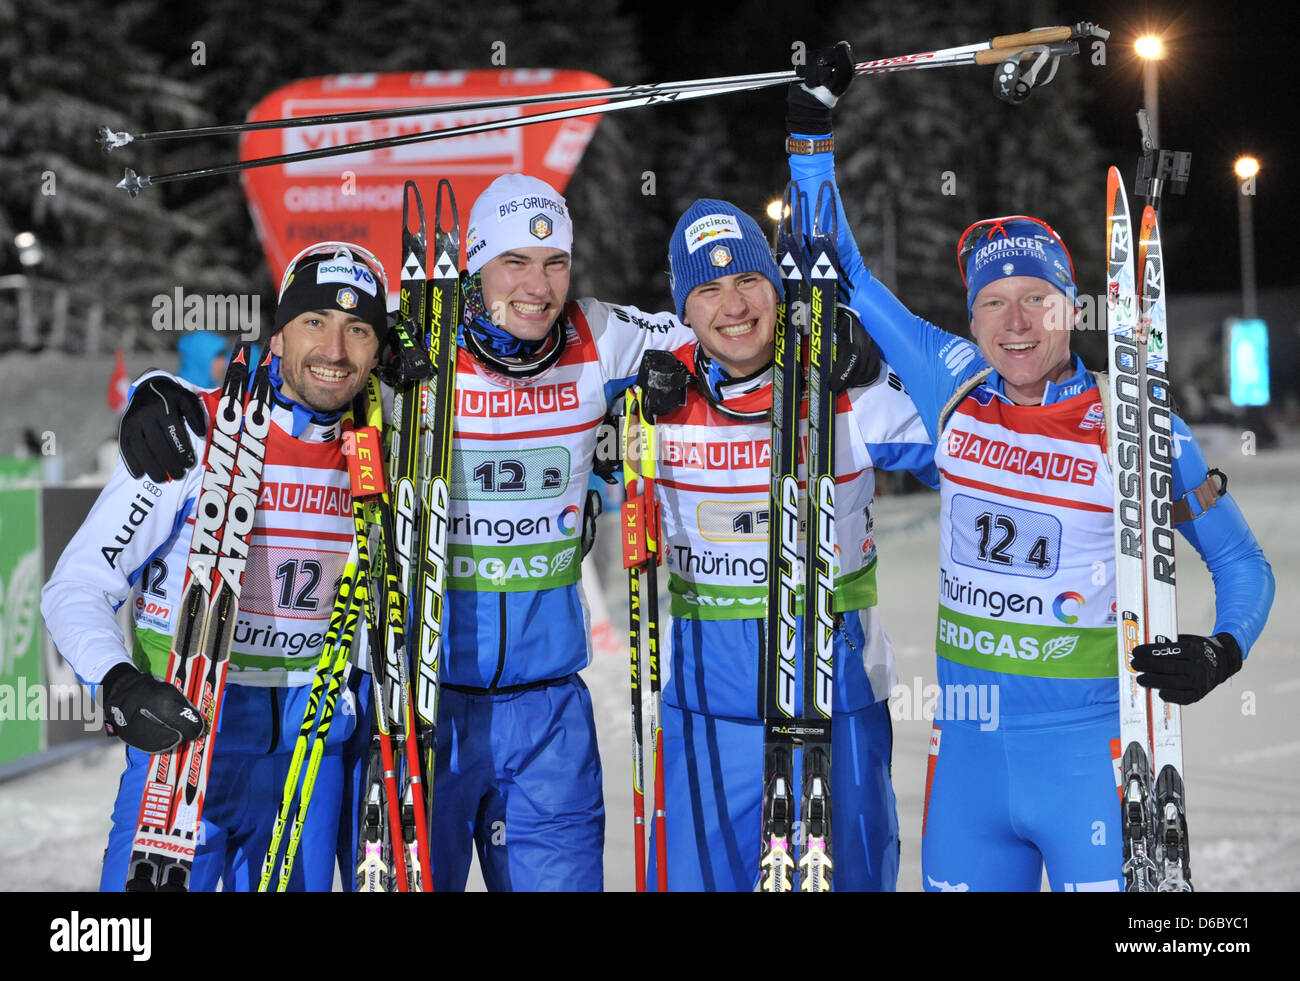 Italian biathletes Christian de Lorenzi (L-R), Markus Windisch, Dominik Windisch and Lukas Hofer celebrate their victory in the men's 4x7.5km relay of the Biathlon World Cup in Oberhof, Germany, 05 January 2012. Italy finished first, ahead of Russia and Sweden. Photo: Martin Schutt Stock Photo